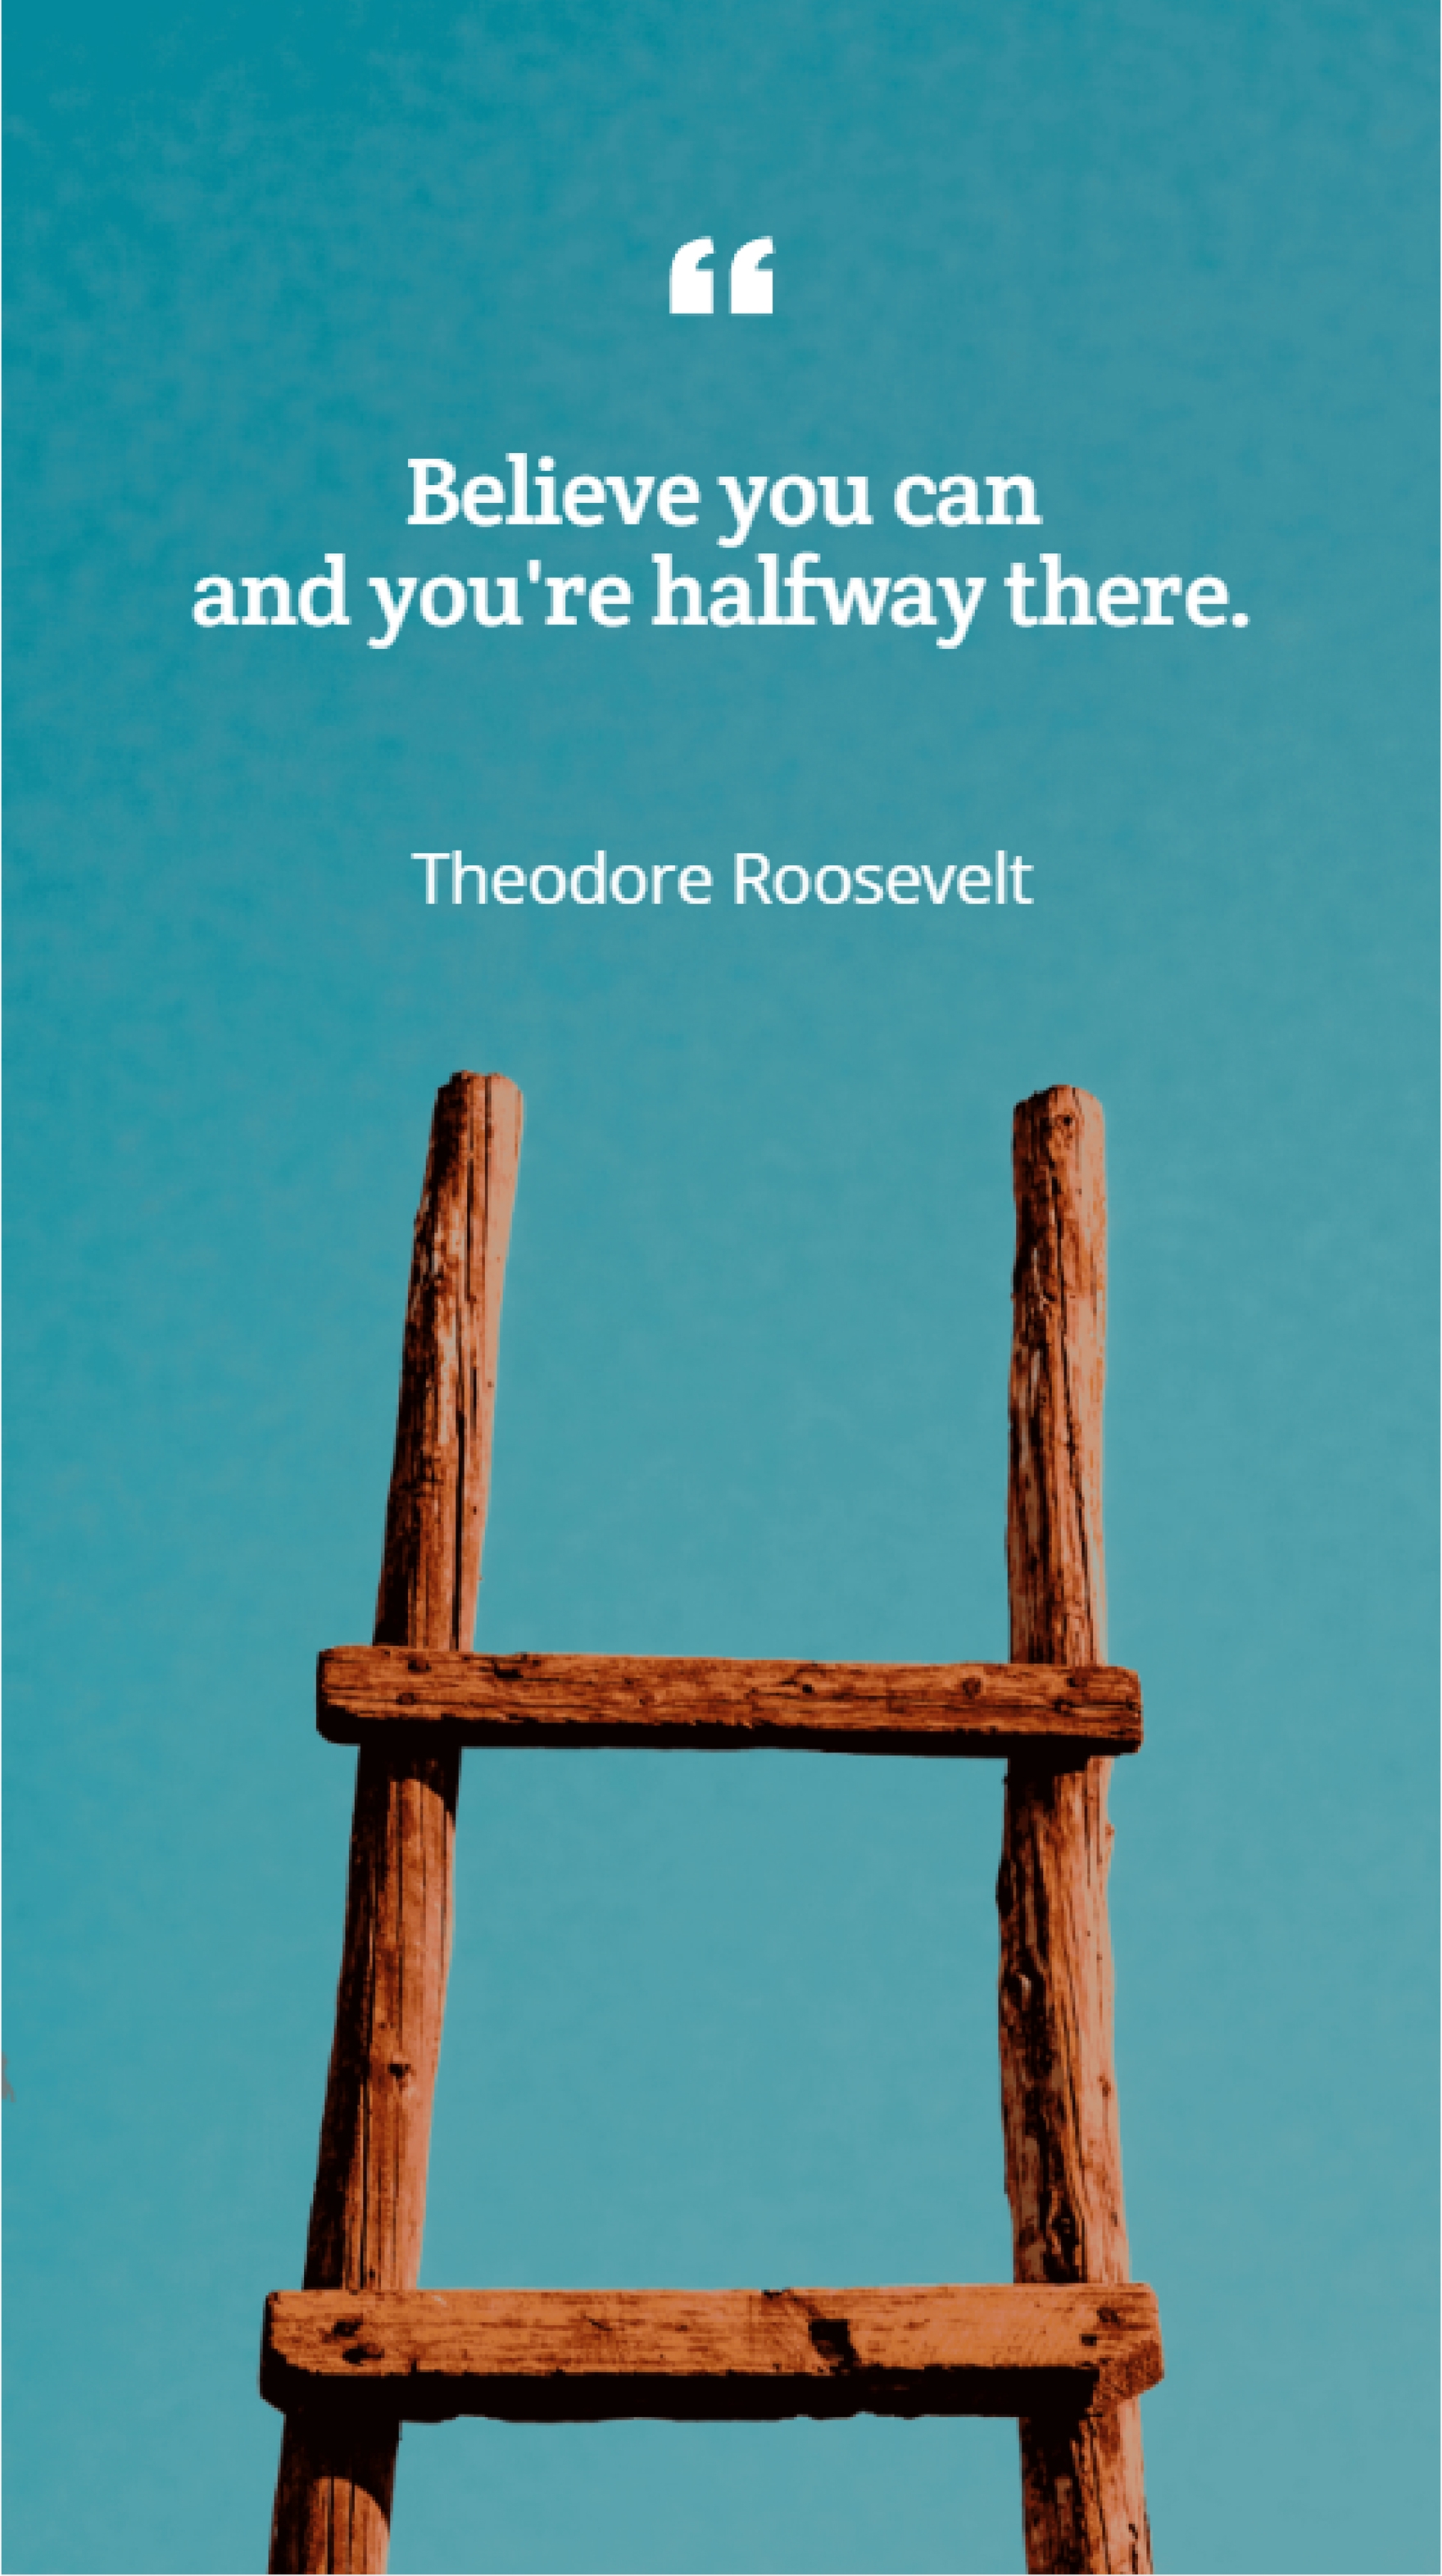 Theodore Roosevelt - Believe you can and you're halfway there